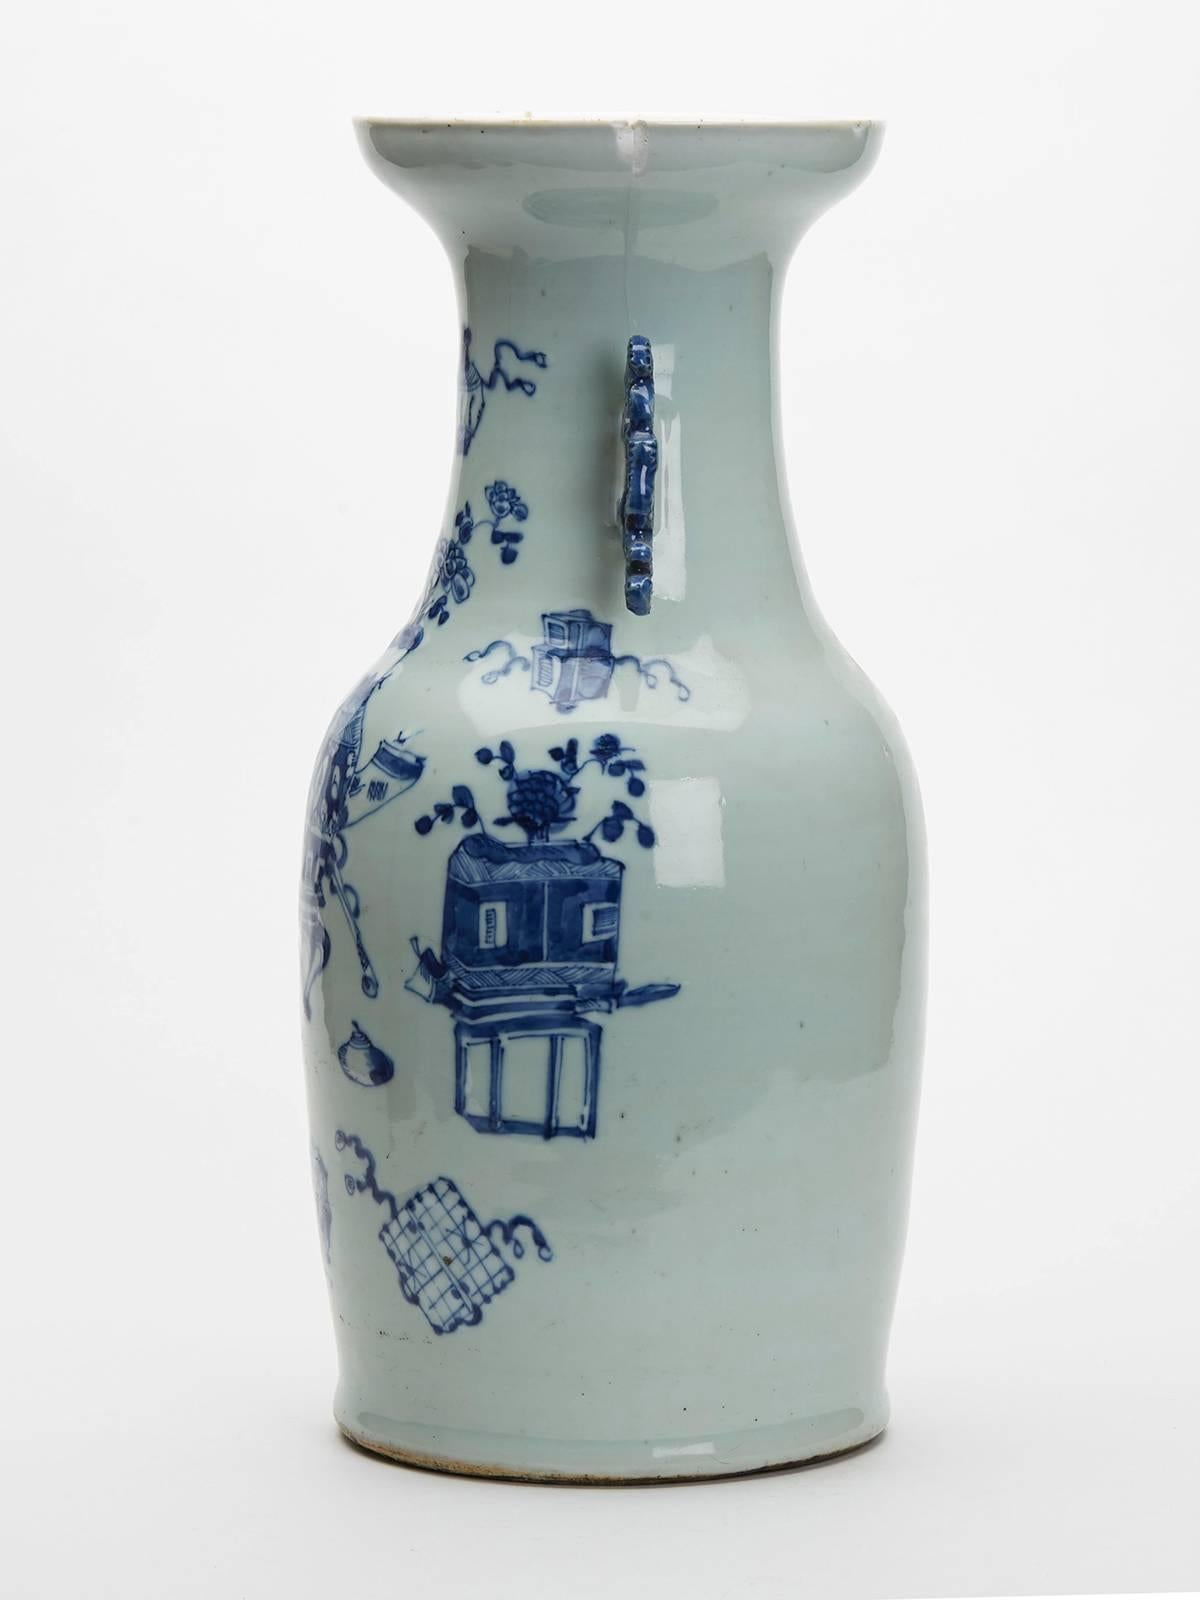 A fine antique Chinese porcelain large baluster vase decorated with various scholars objects in low relief and decorated in underglaze blue within a celadon glazed ground. The vase has moulded stylized handles to either side of wide funnel neck with